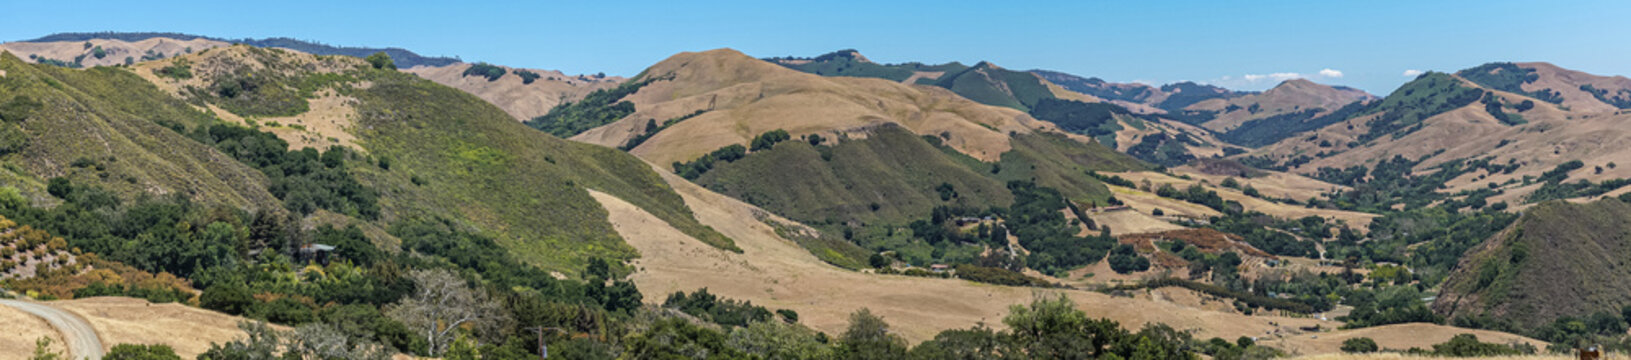 Cambria, CA, USA - June 9, 2021: Panorama landscape of Back country with dry ranch land and patches of green trees on steep flanks of mountains under blue sky.